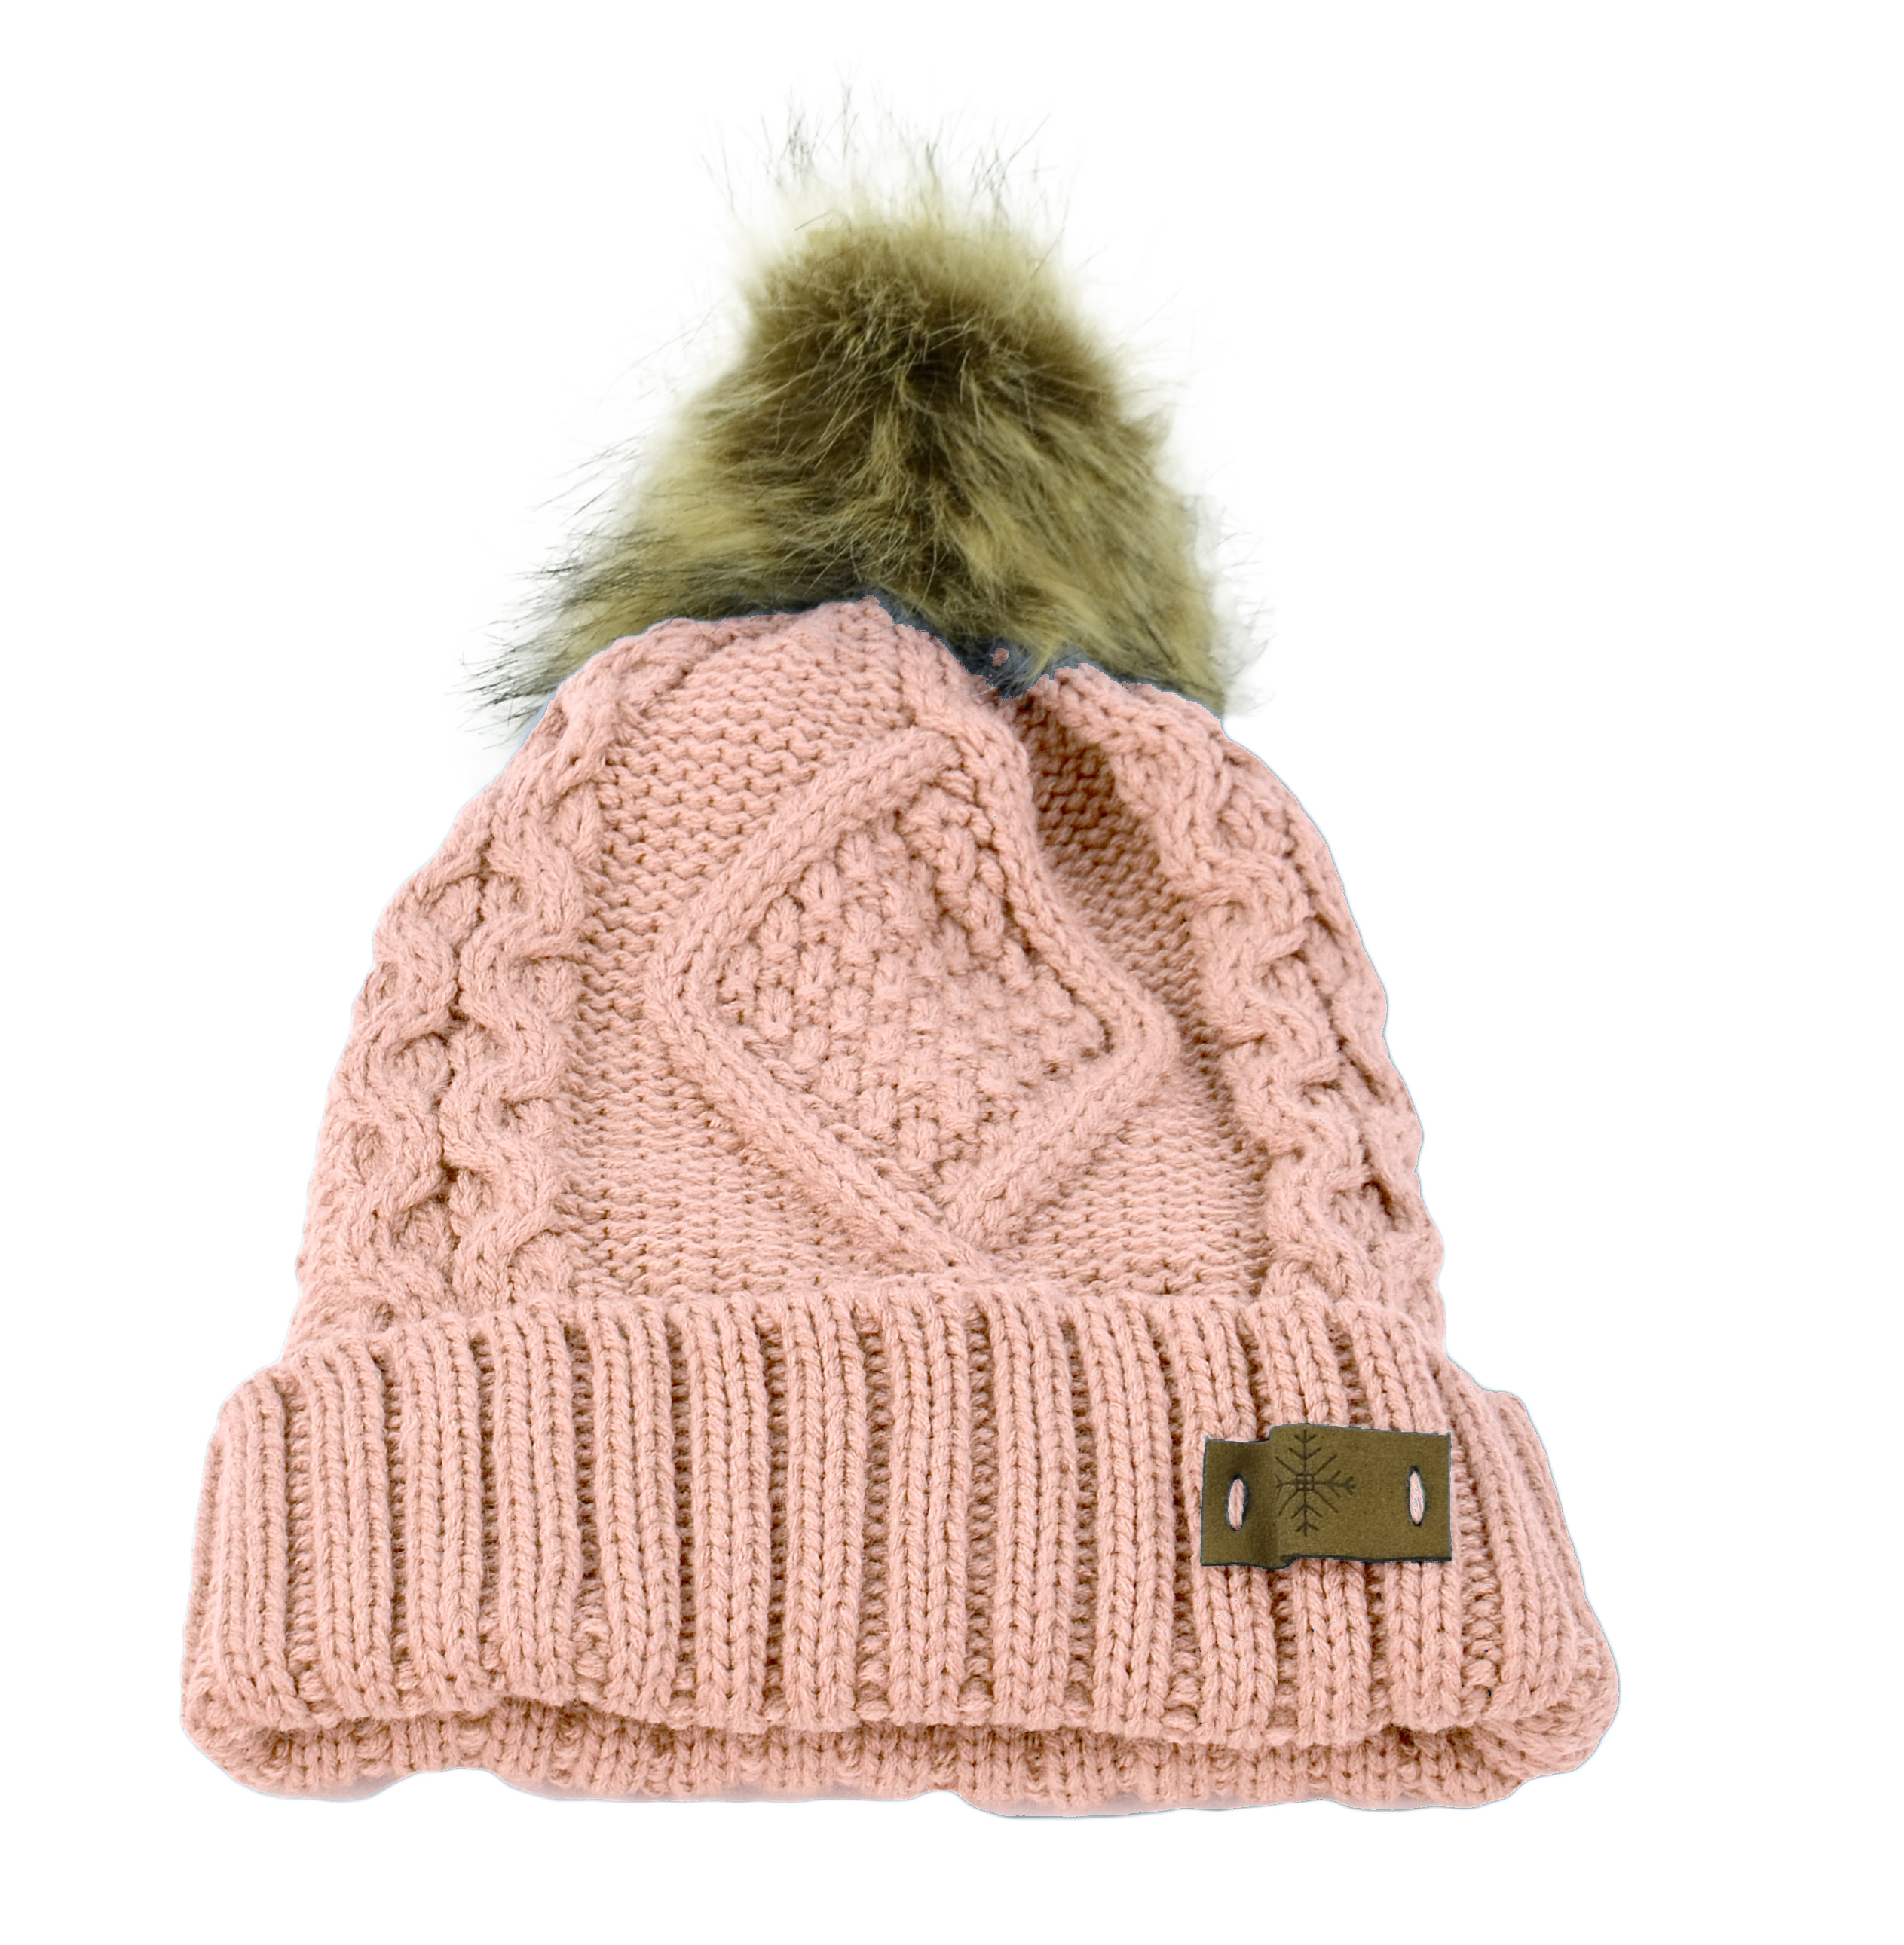 Belle Donne - Women's Winter Fleece Lined Cable Knitted Pom Pom Beanie Hat - INDI PINK